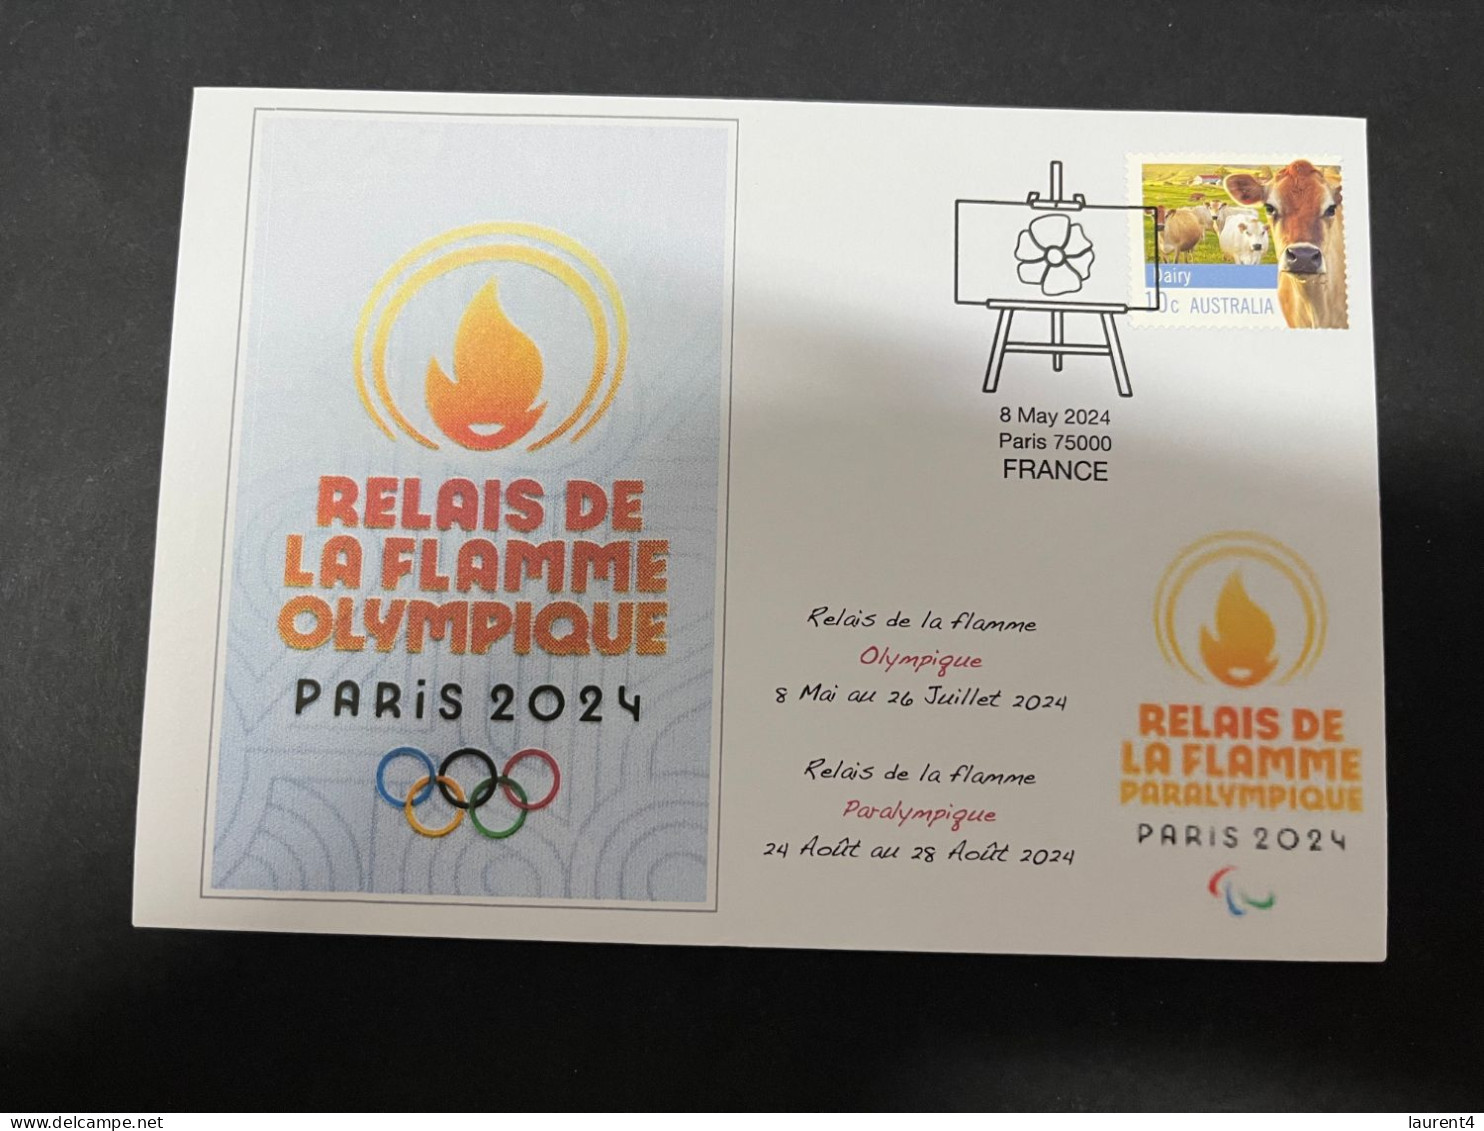 15-5-2024 (5 Z 12) Paris Olympic Games 2024 - Torch Relay In France (with OZ Stamp) - Sommer 2024: Paris